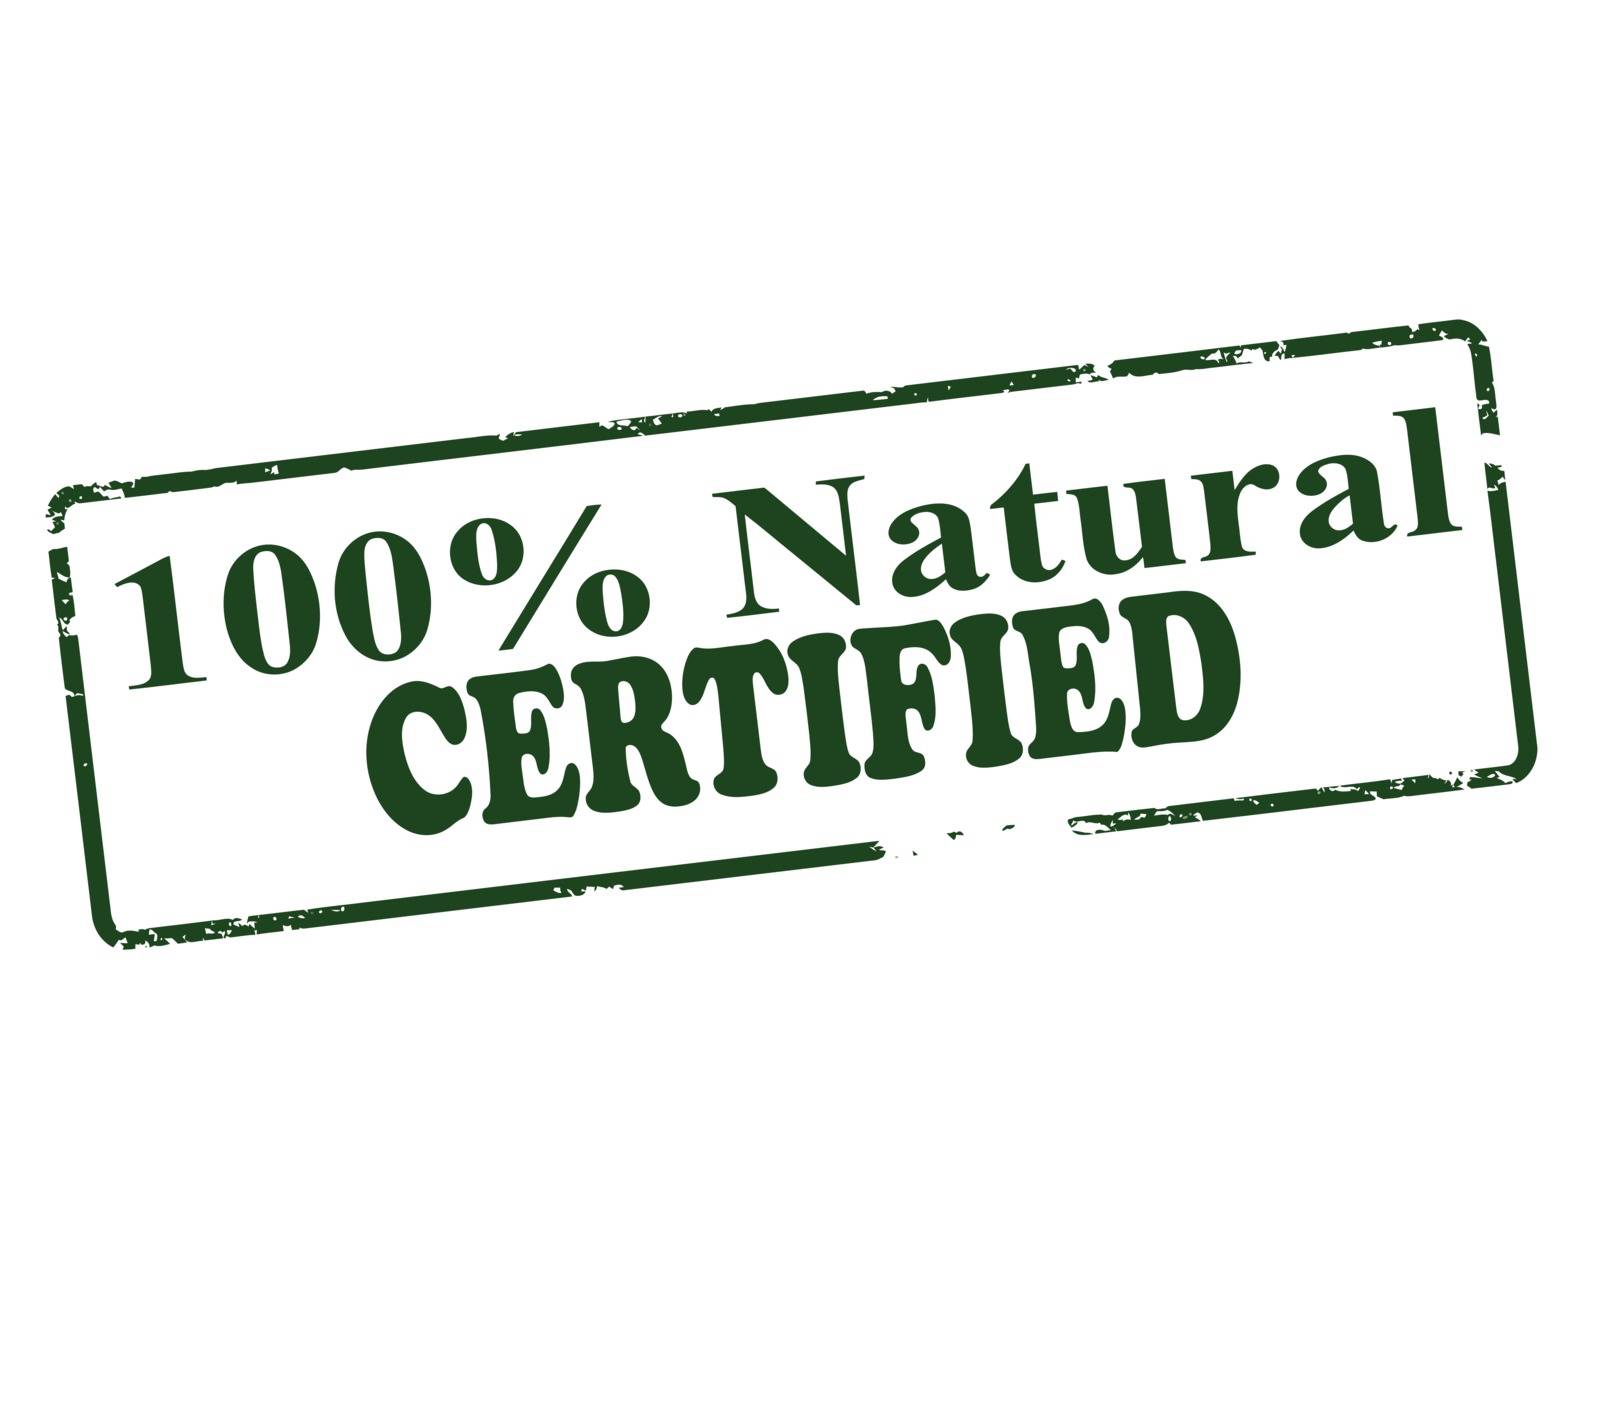 One hundred percent natural certified by carmenbobo